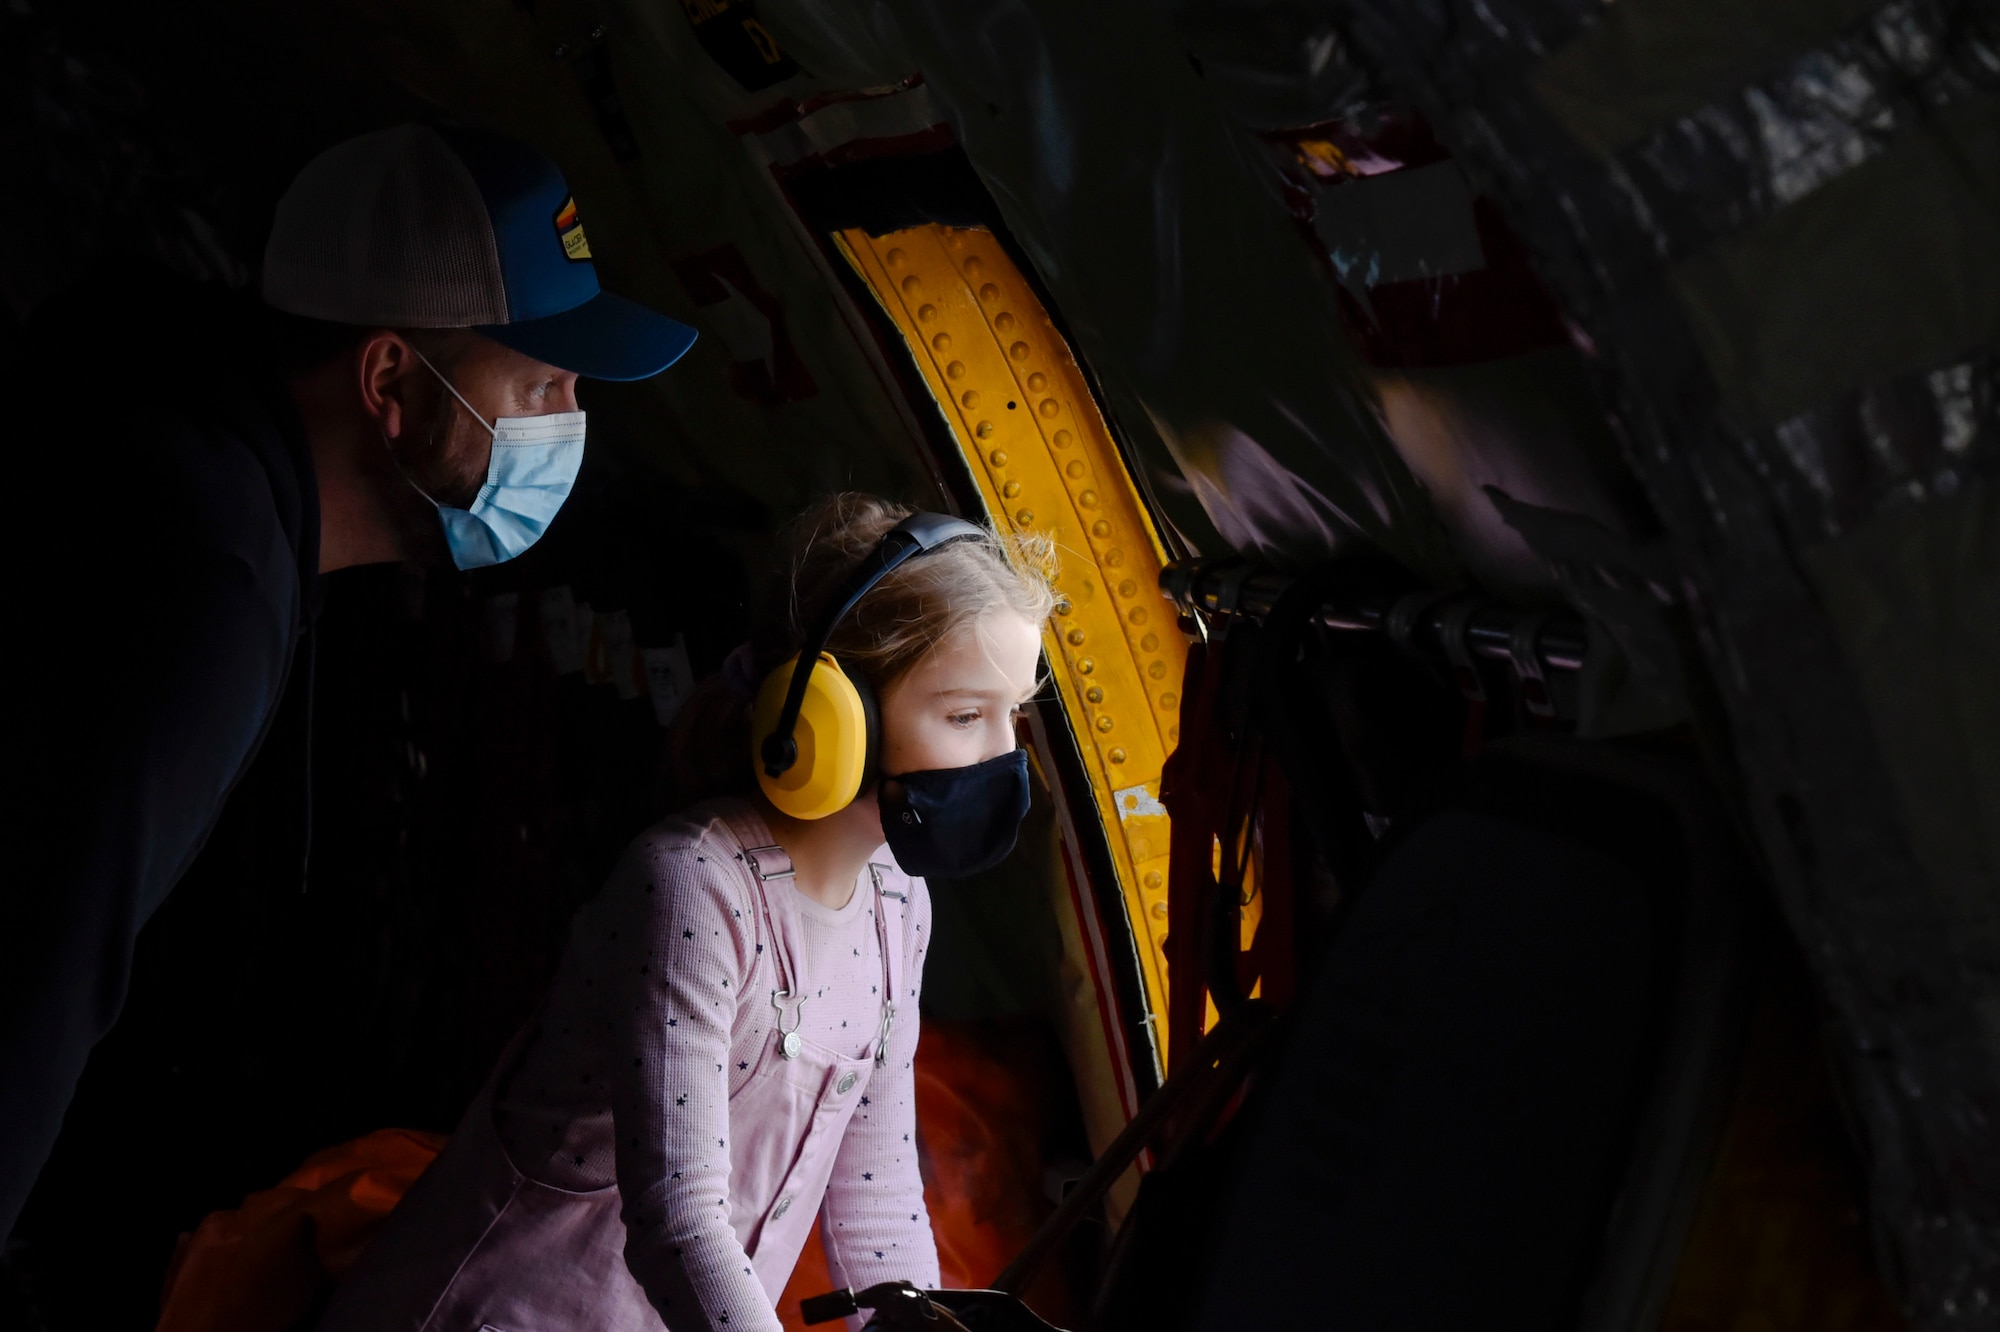 A young girl and her father peer out the window of a KC-135 Stratotanker static display during “The Sky’s No Limit: Girls Fly Too” event in Abbotsford, Canada, Oct. 3, 2021. The event gave Airmen from Fairchild an opportunity to empower young ladies, and inspire them to pursue various career opportunities. (U.S. Air Force photo by 2nd Lt. Michelle Chang)